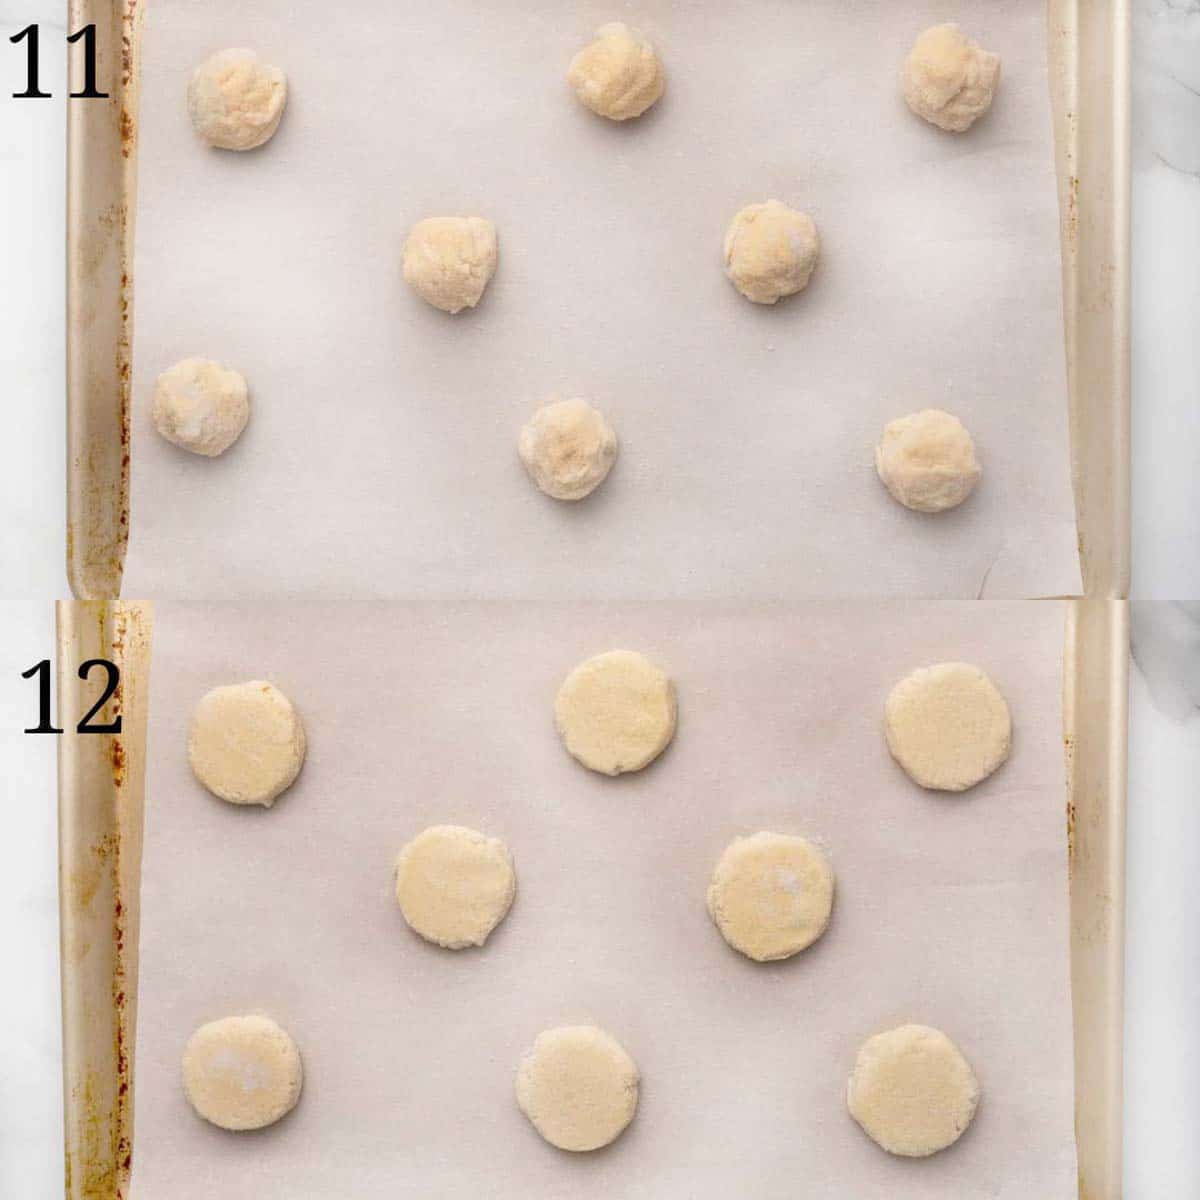 collage showing how to prepare the dough for baking